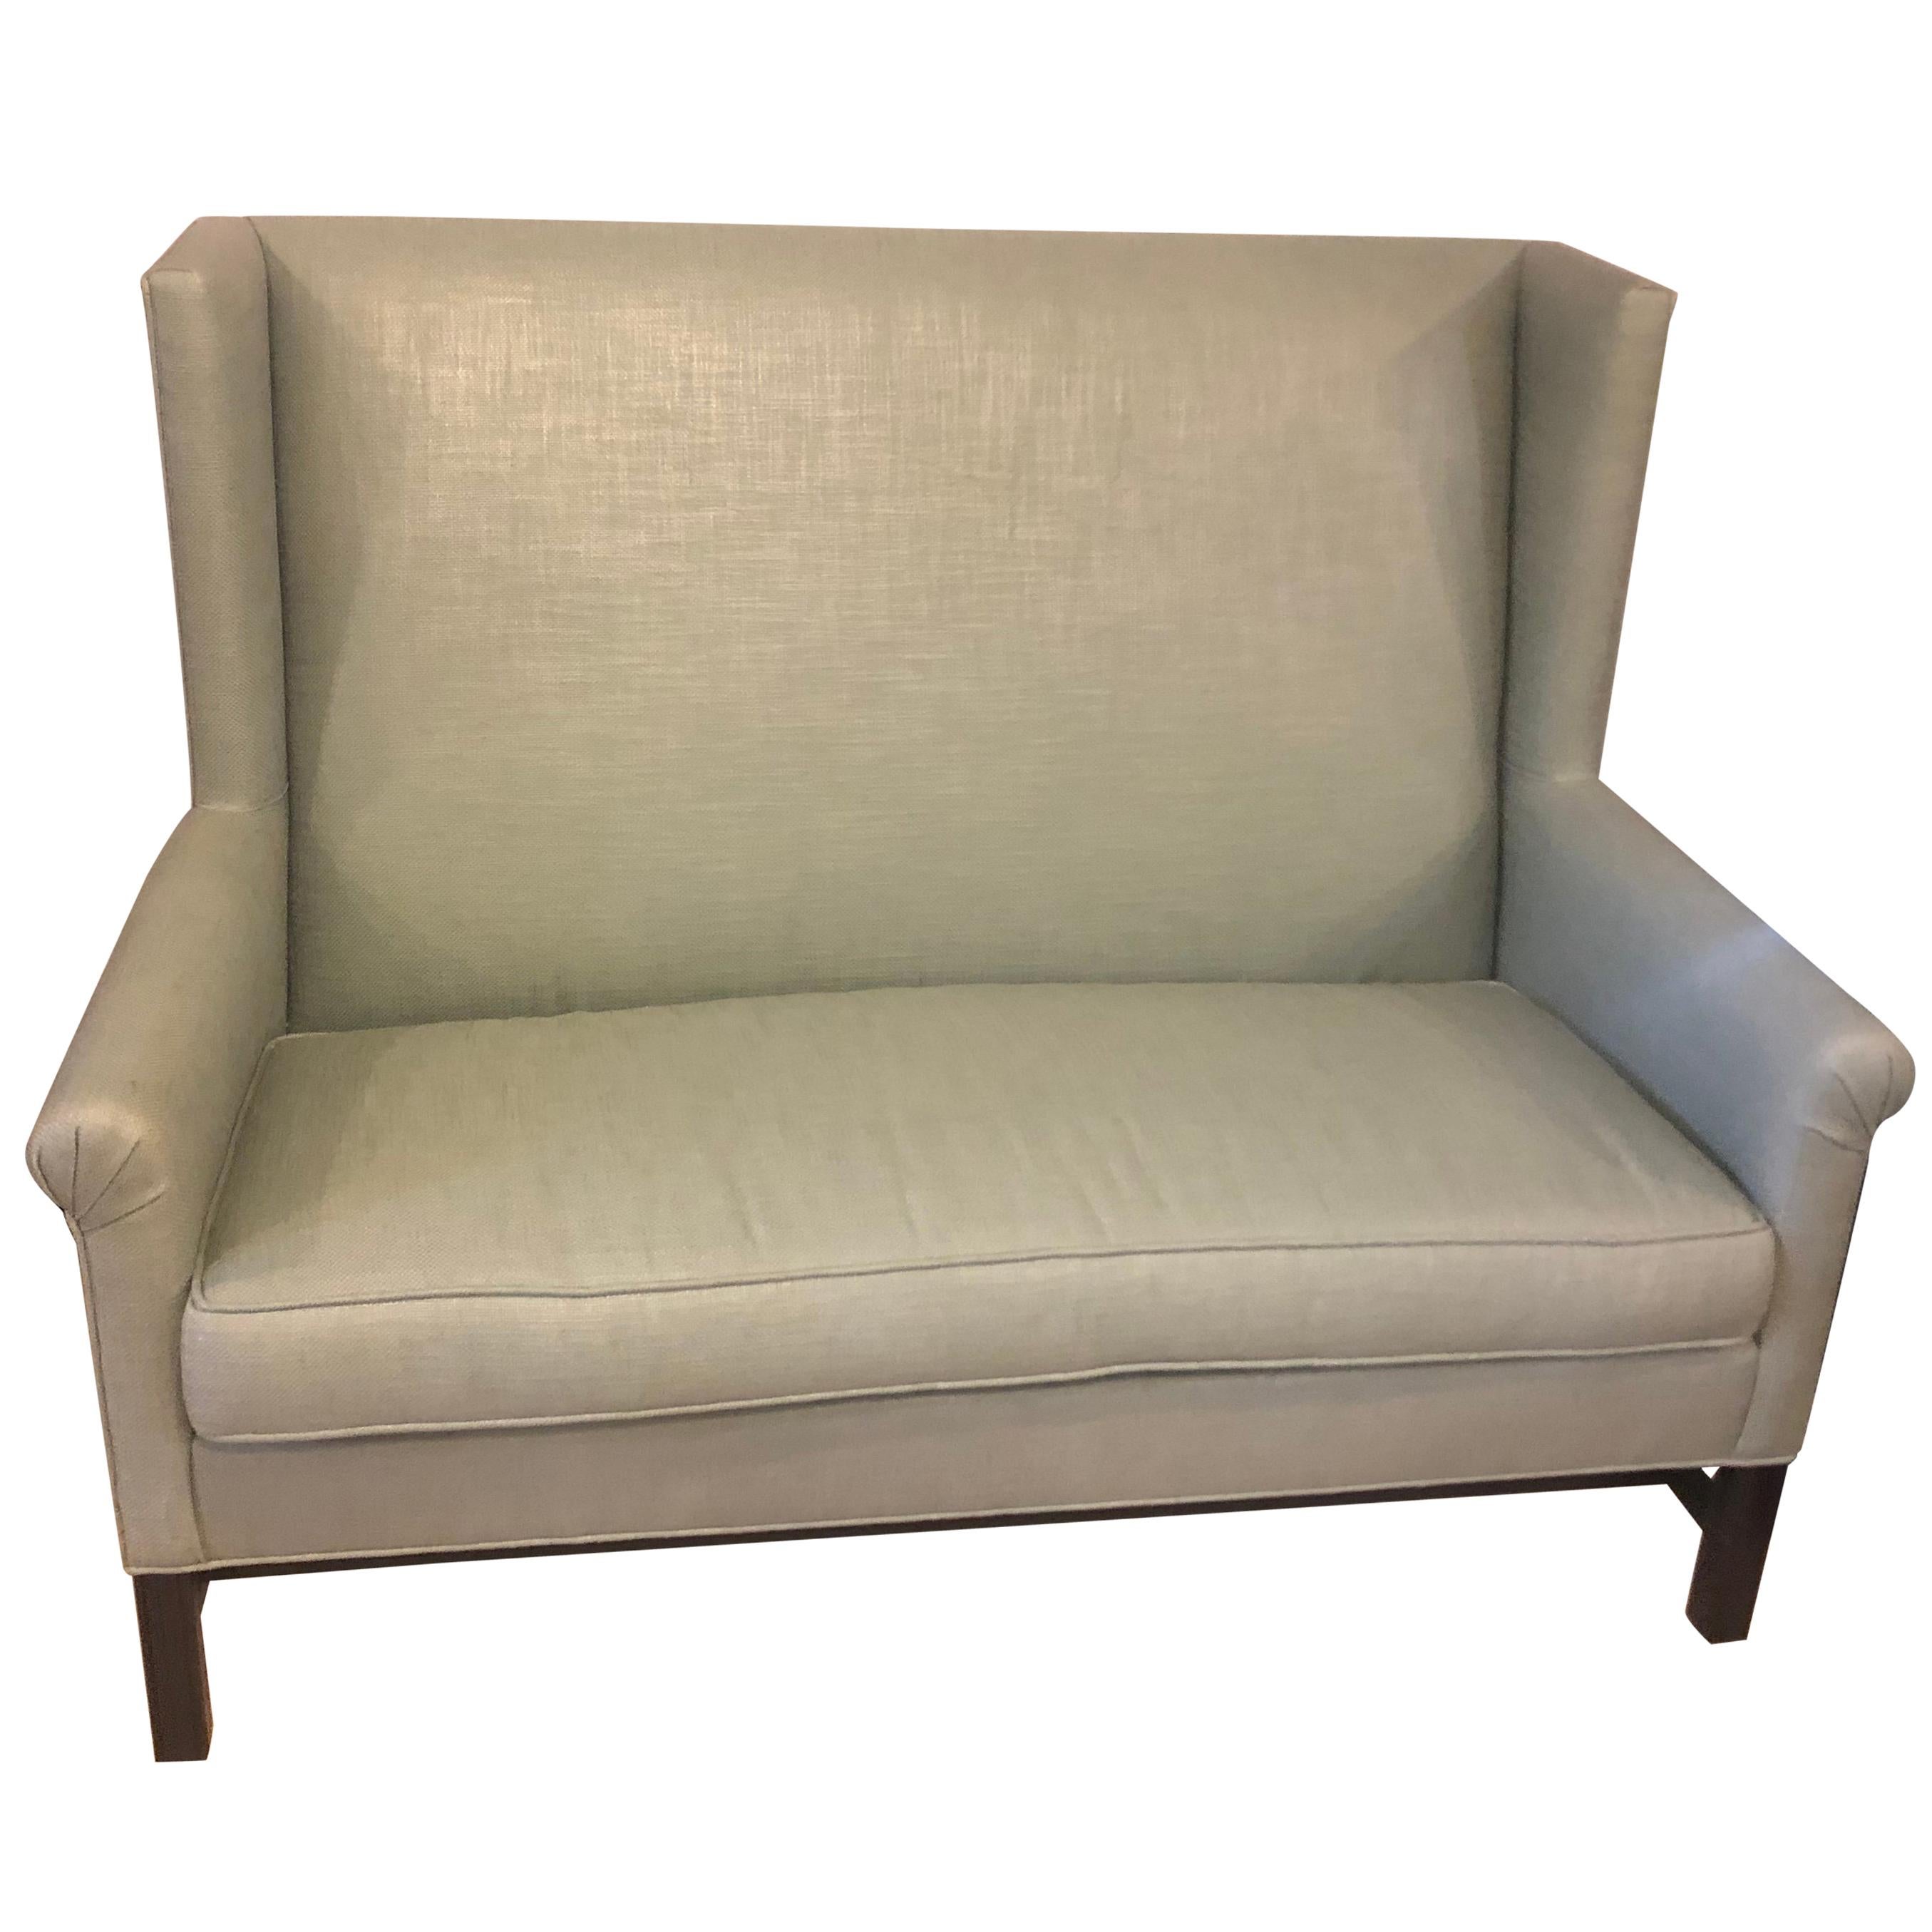 Hickory Co Charles Stewar Chippendale Style Settee or Loveseat in Green Linen